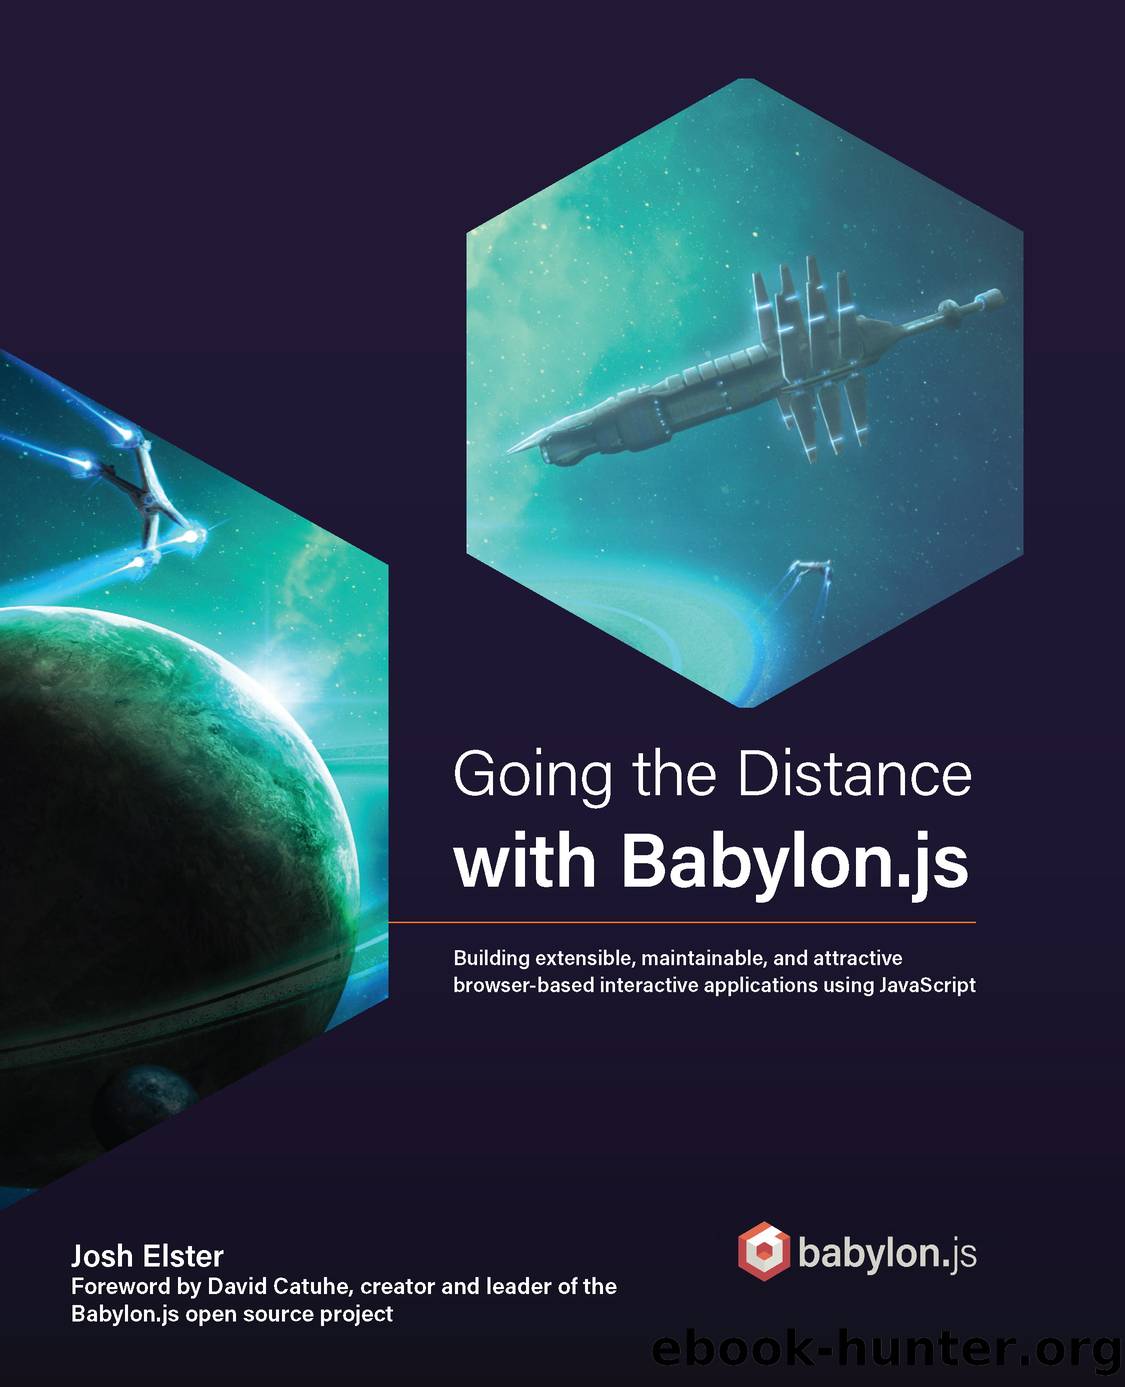 Going the Distance with Babylon.js by Josh Elster